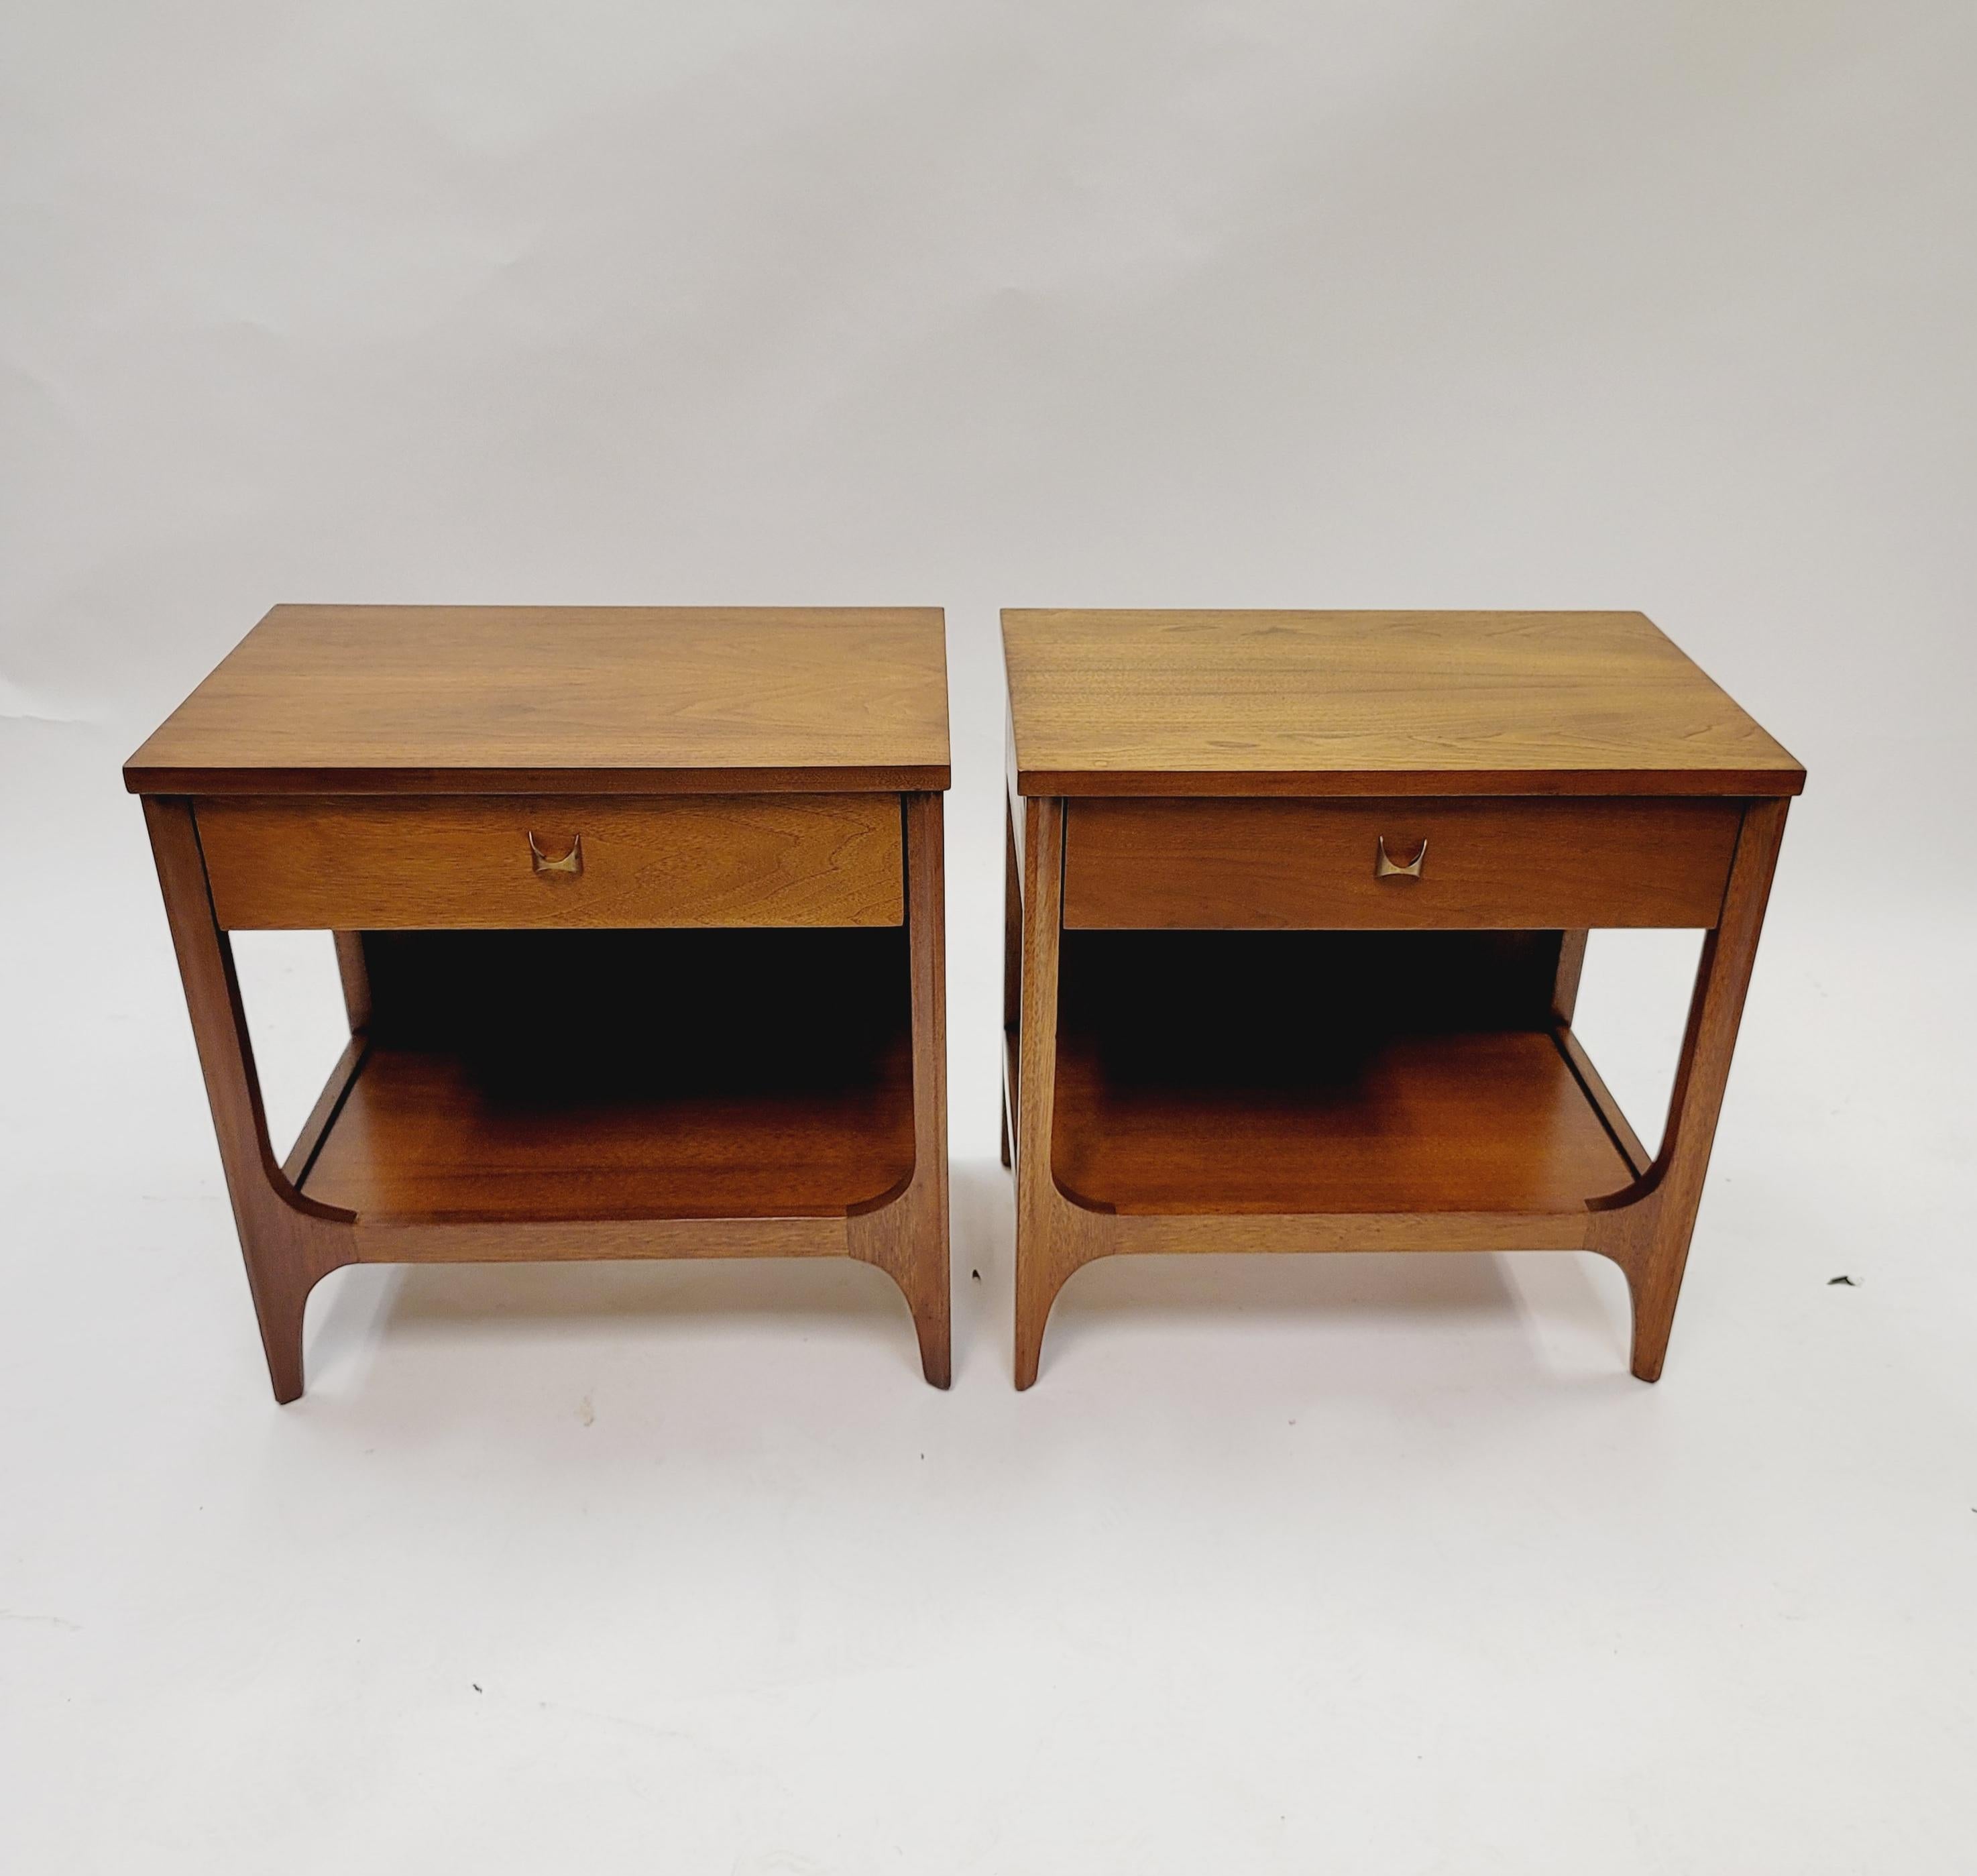 This pair of hard-to-find Broyhill Brasilia nightstands are beautifully constructed from walnut with brass sculptural pulls. One drawer and a lower shelf on each stand provide maximum storage.